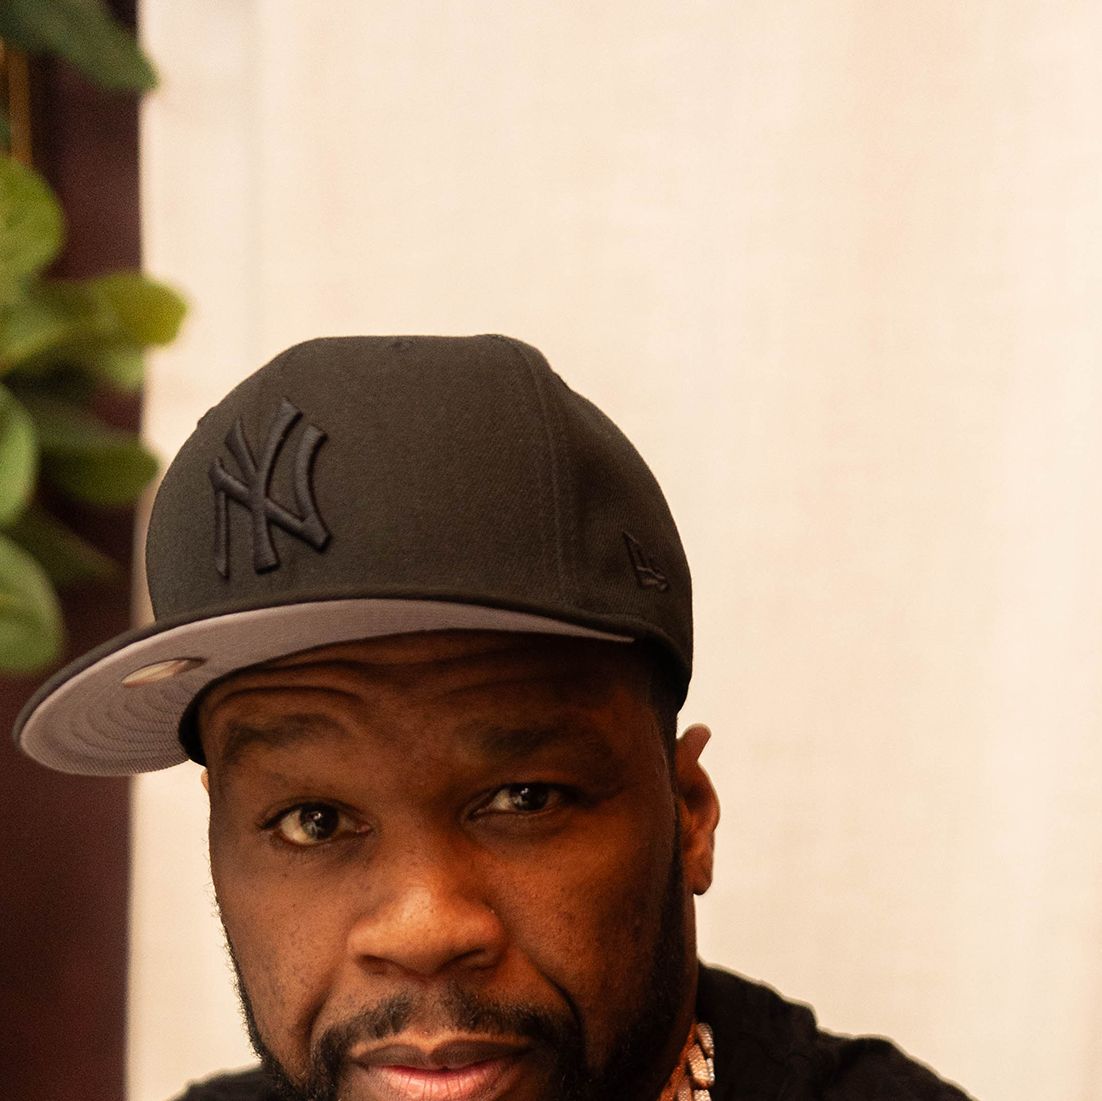 50 Cent Is Practicing Abstinence to 'Focus on His Goals'